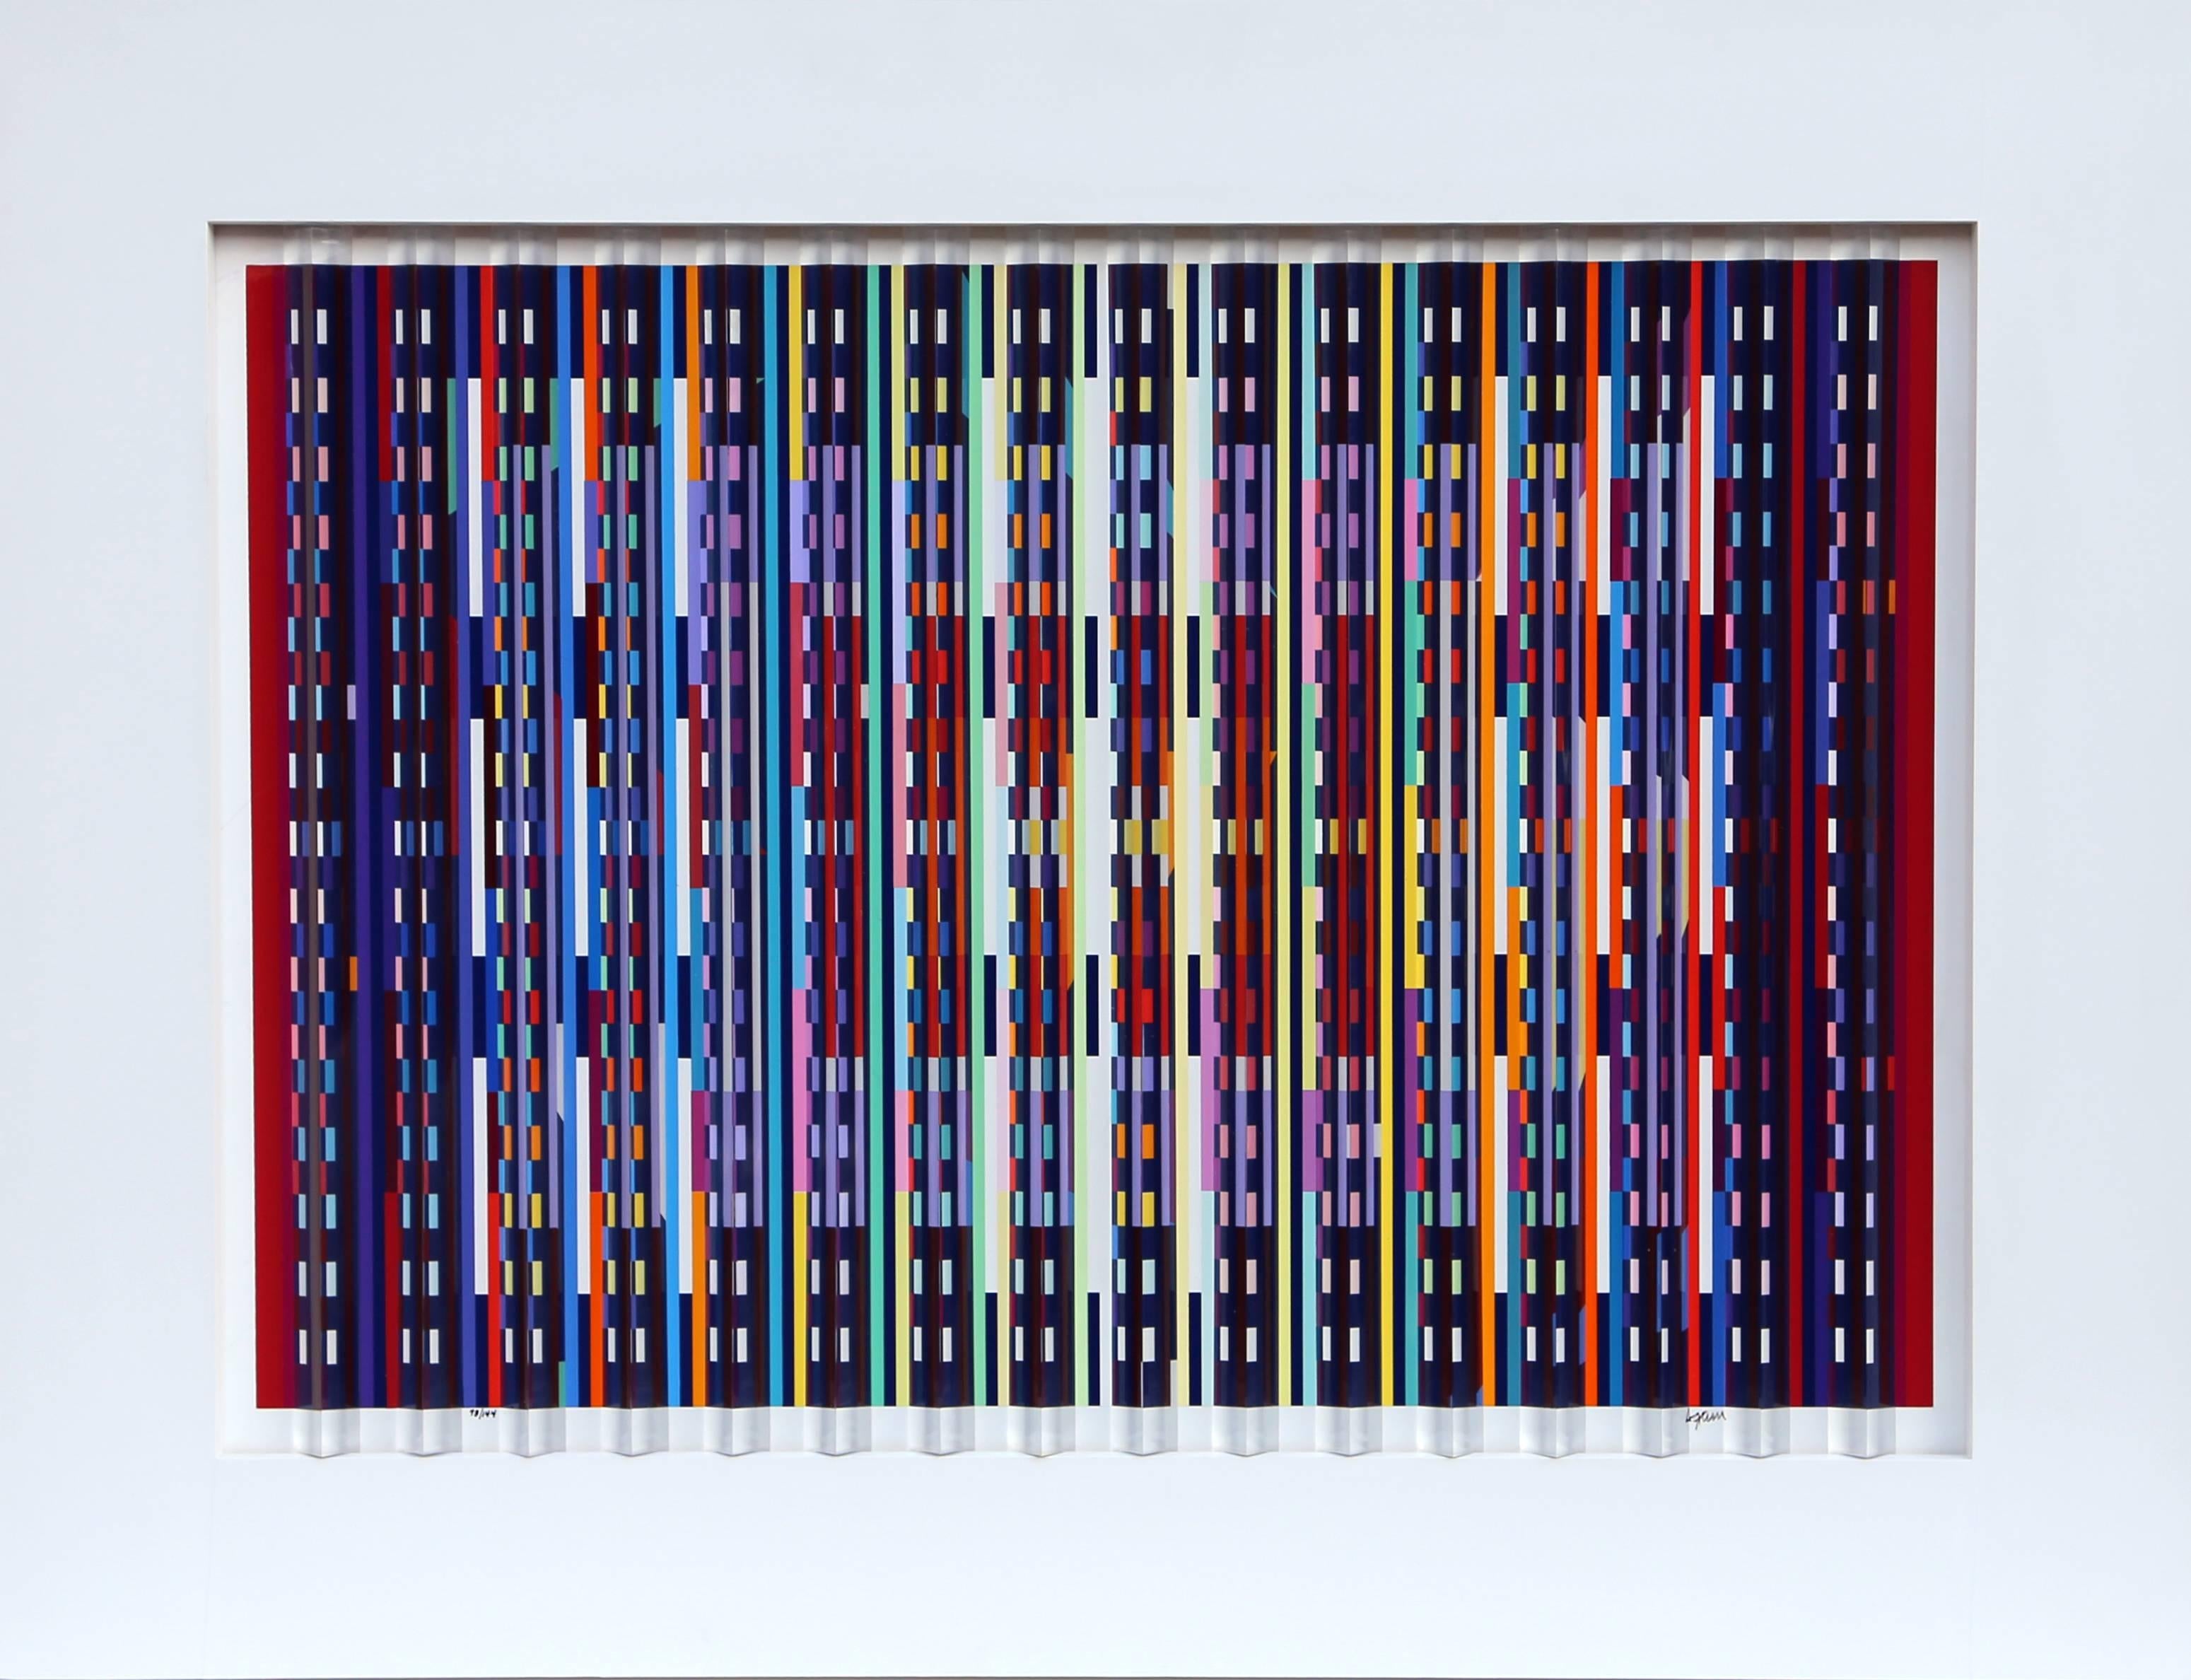 Artist: Yaacov Agam, Israeli (1928 - )
Title: Midnight Blue
Yea: 1980
Medium: Prismagraph, signed and numbered in ink
Edition: 144 
Image Size: 19.5 x 28 inches
Frame Size: 26 x 35 inches